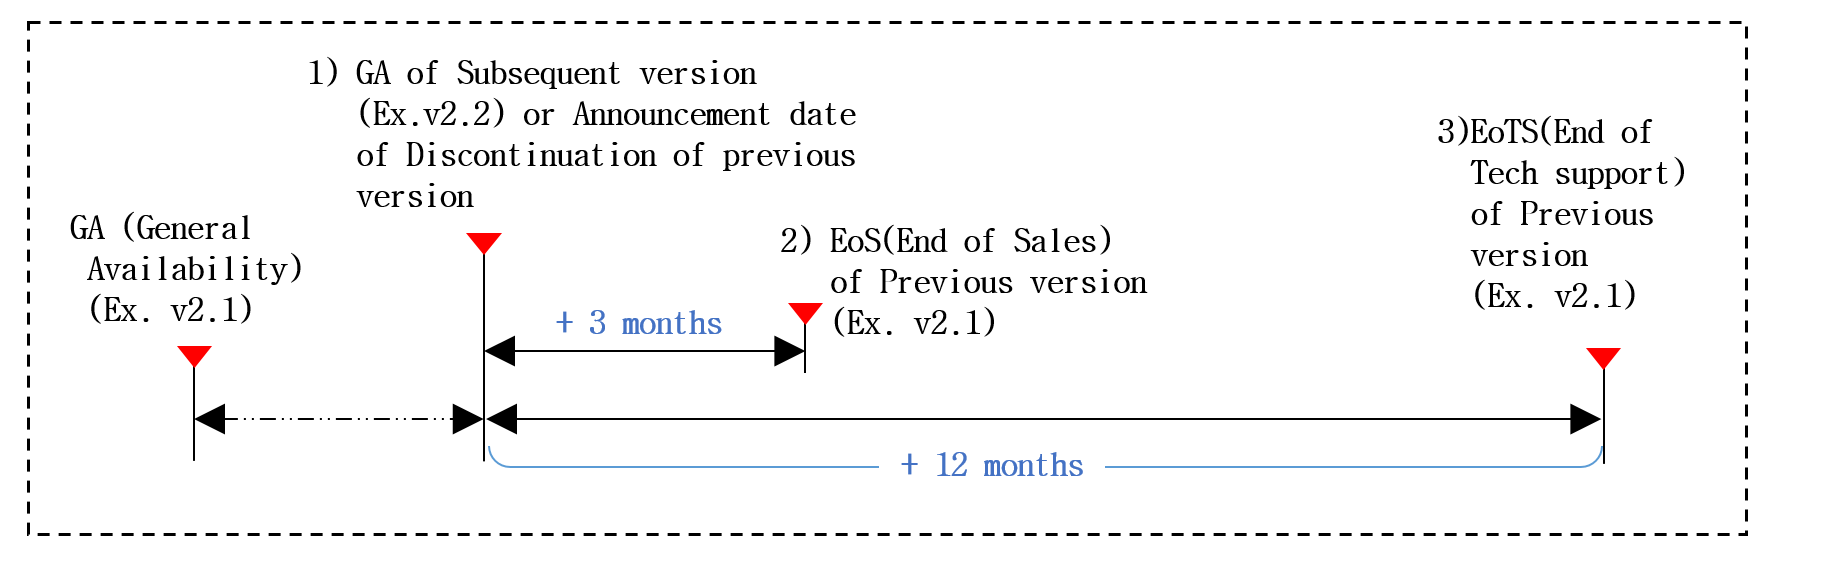  Technical support end date calculation method is to calculate the end date of the technical support for the old version when a new version is released.
For example, when the new version of v2.2 is released or discontinuation of previous version is announced, the old version of v2.1 will be calculated from that point and will end sales three months later, and after twelve months later, no technical support of any kind will be provided for the old version v2.1. 
It is strongly recommended that your software is upgraded to the latest version released.  